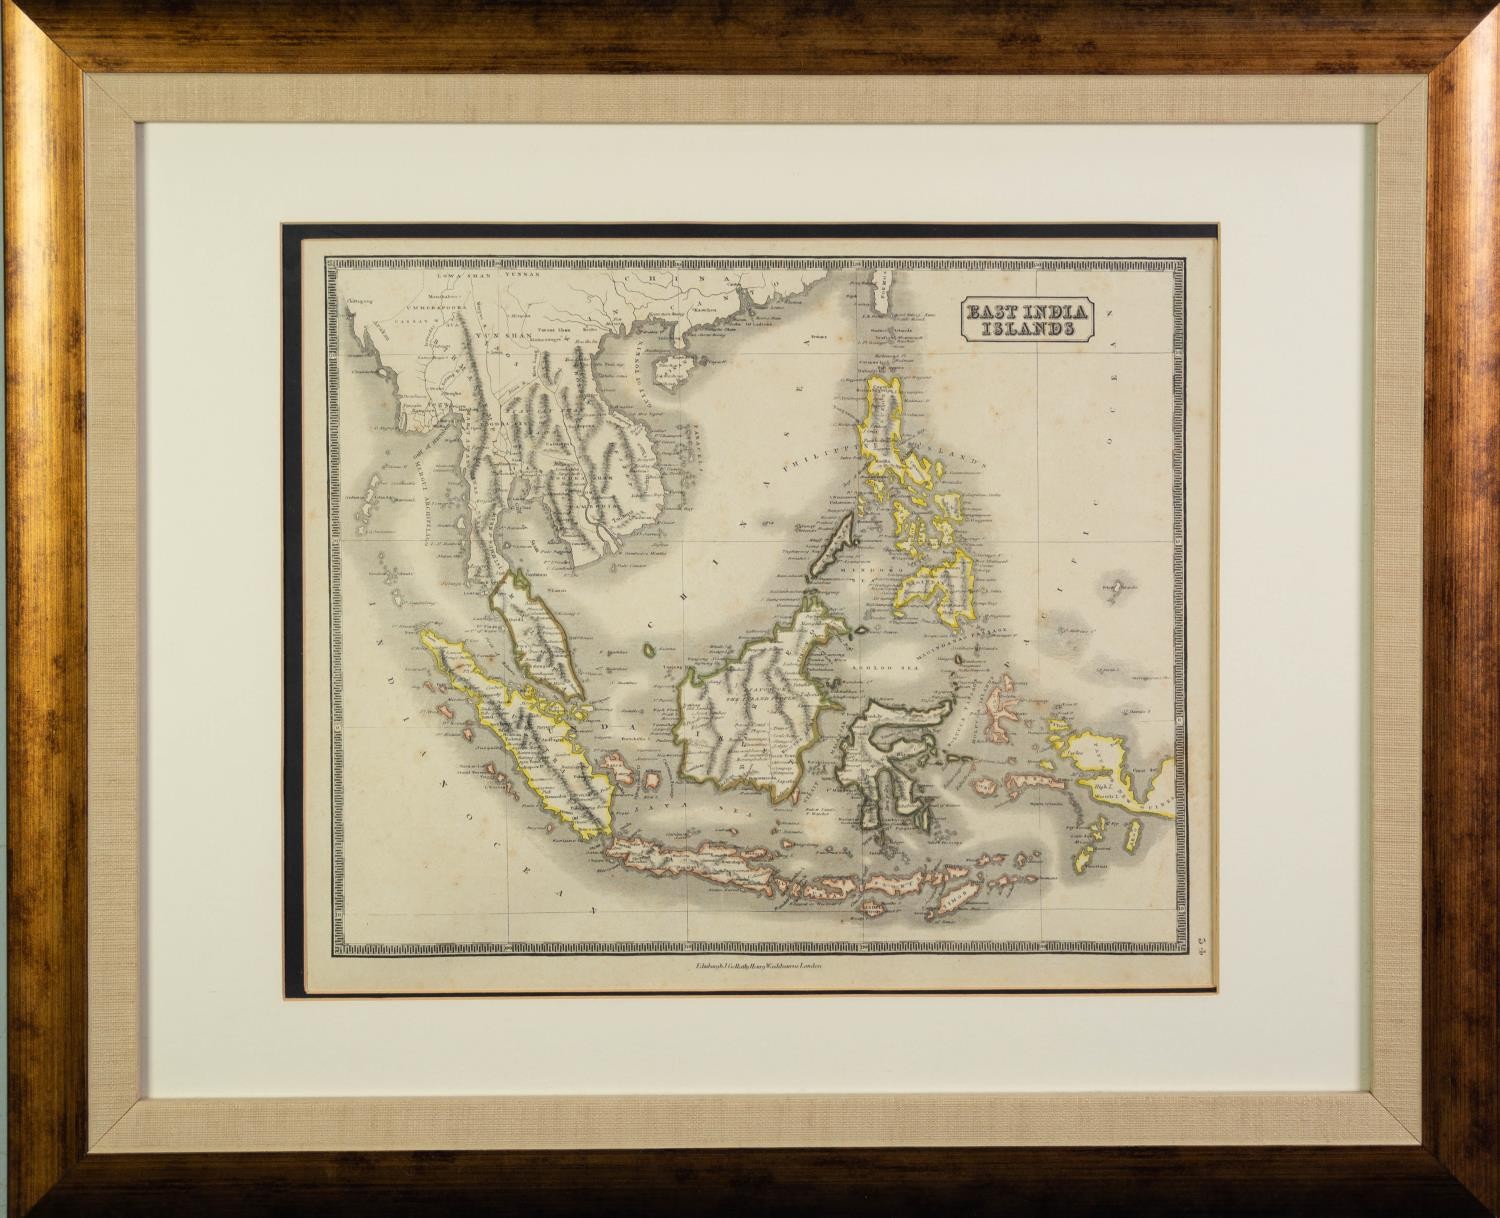 NINETEENTH CENTURY HAND COLOURED MAP OF EAST INDIA ISLANDS, PUBLISHED BY J. GELLATLY AND HENRY - Image 2 of 2